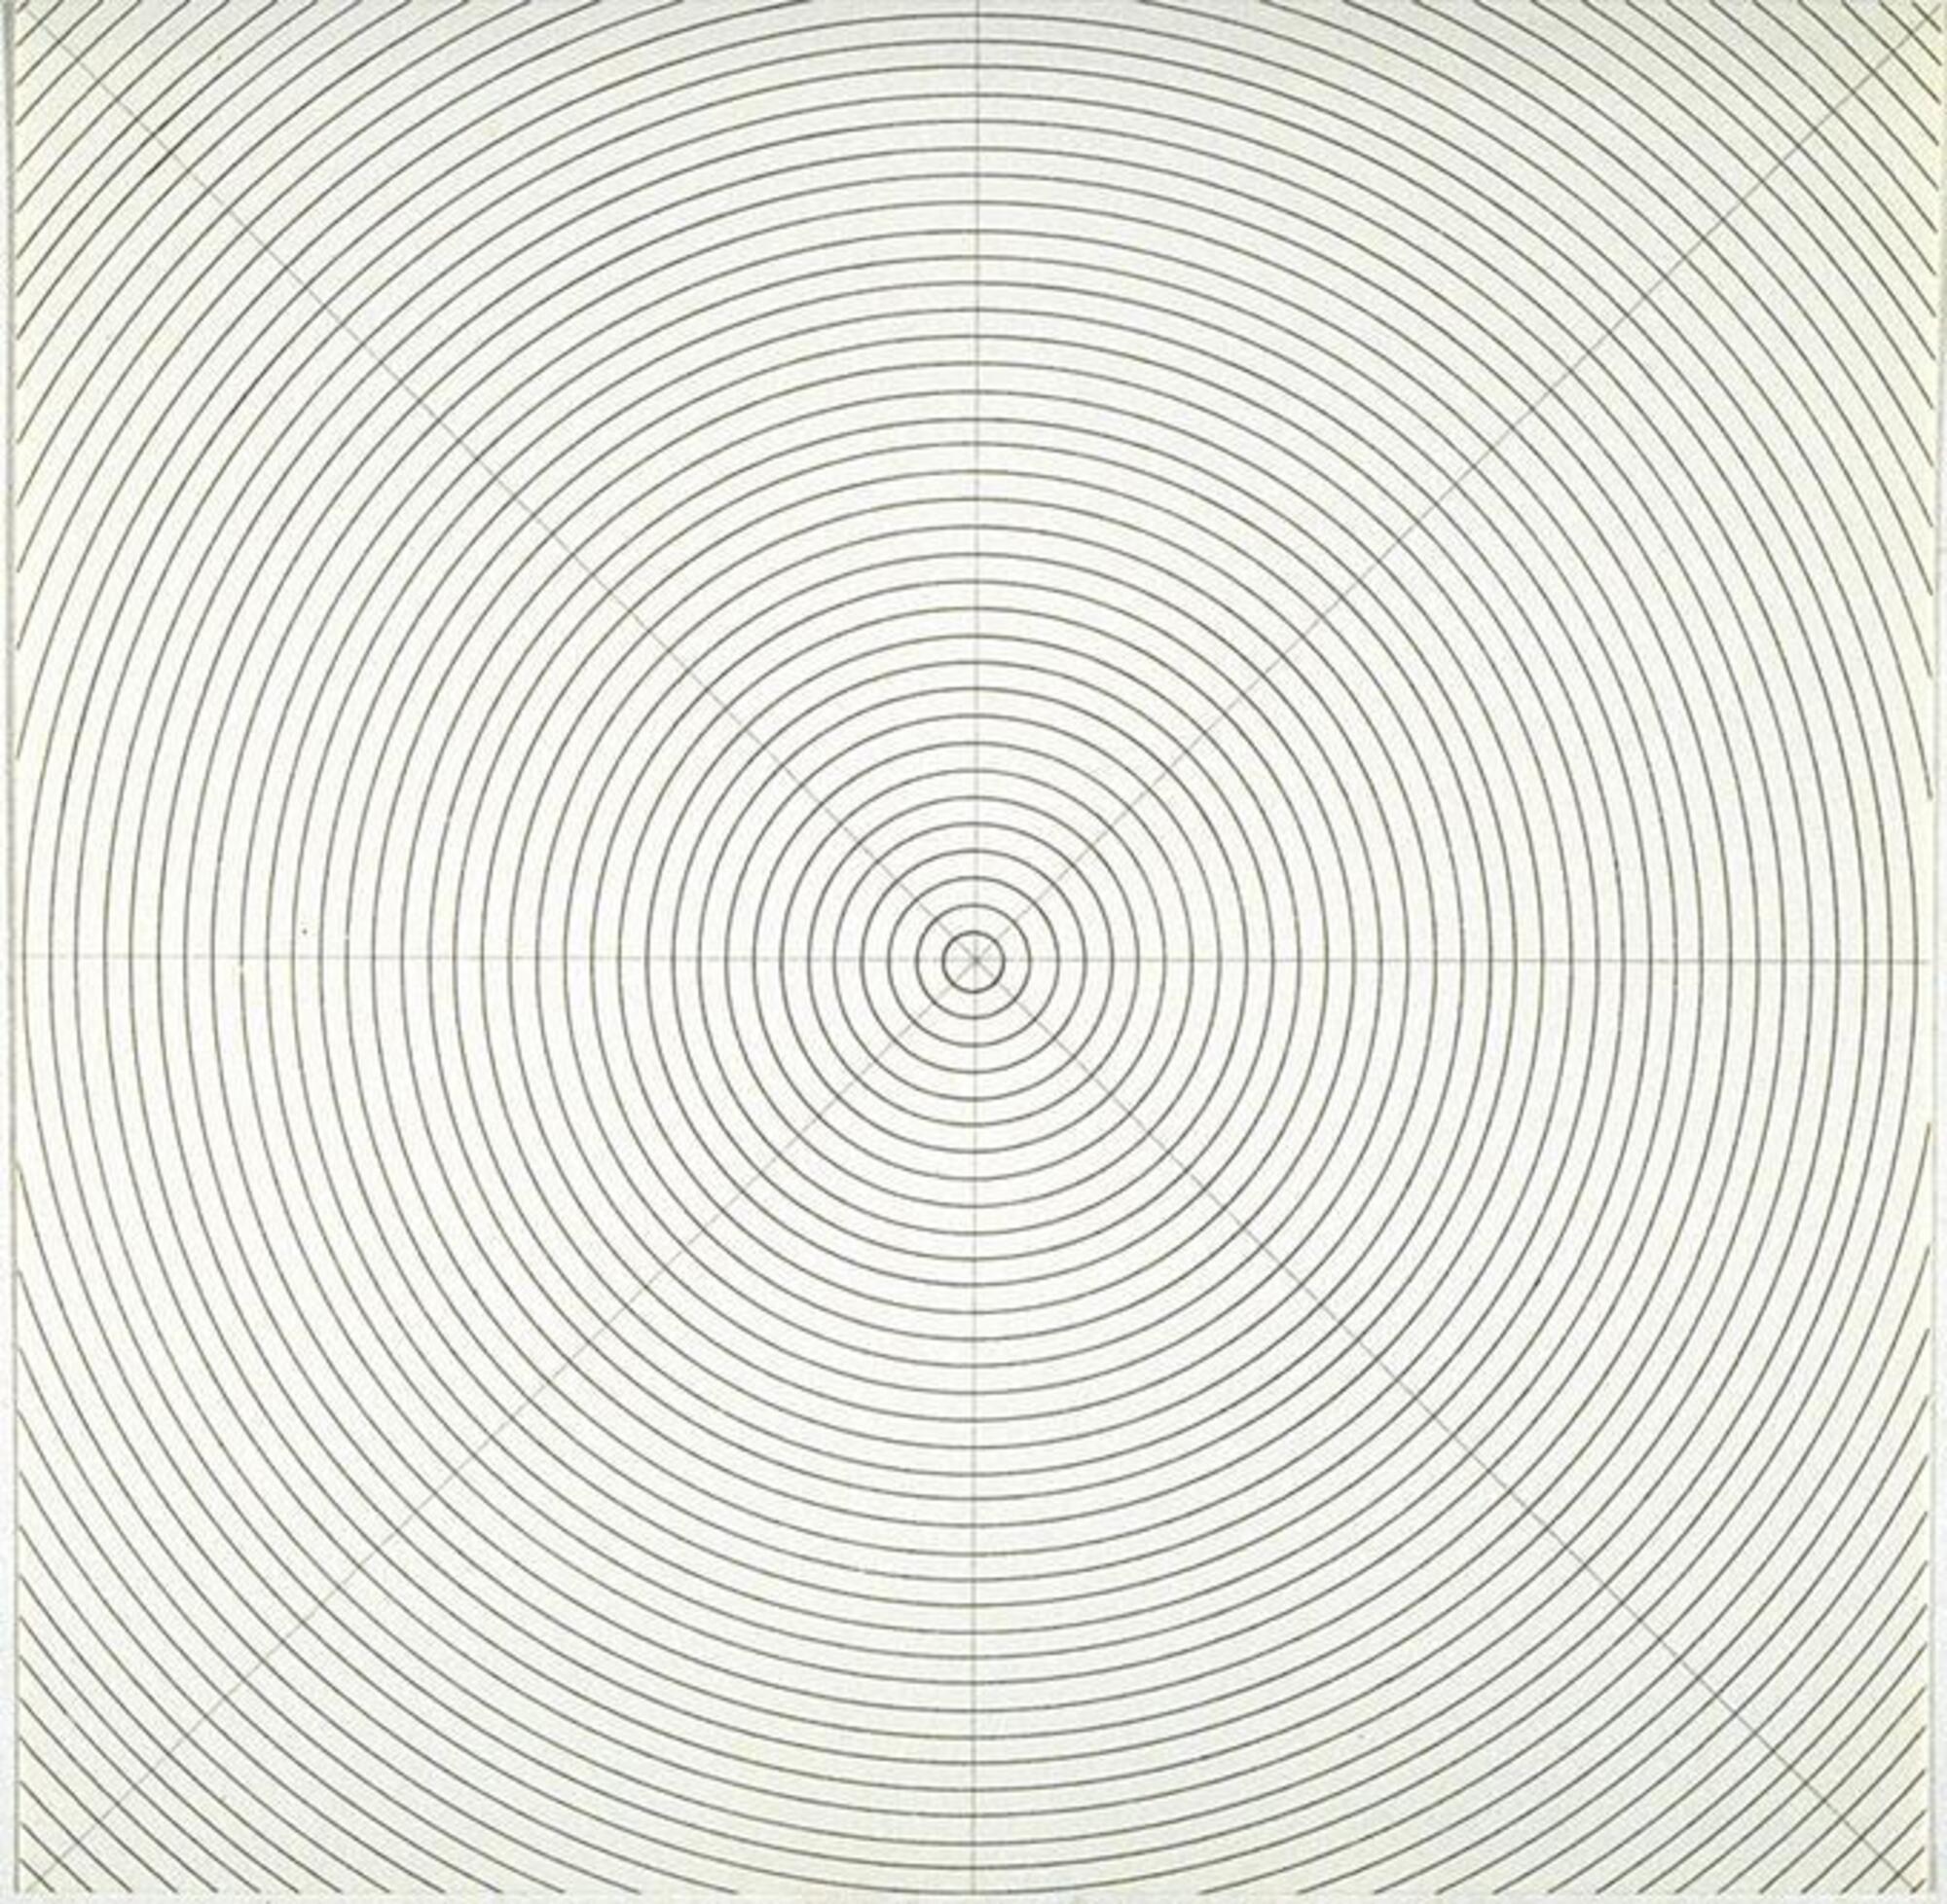 A print of concentric circles bisected by lines extending from every corner and midpoint length.&nbsp;<br />
<br />
EC 2017